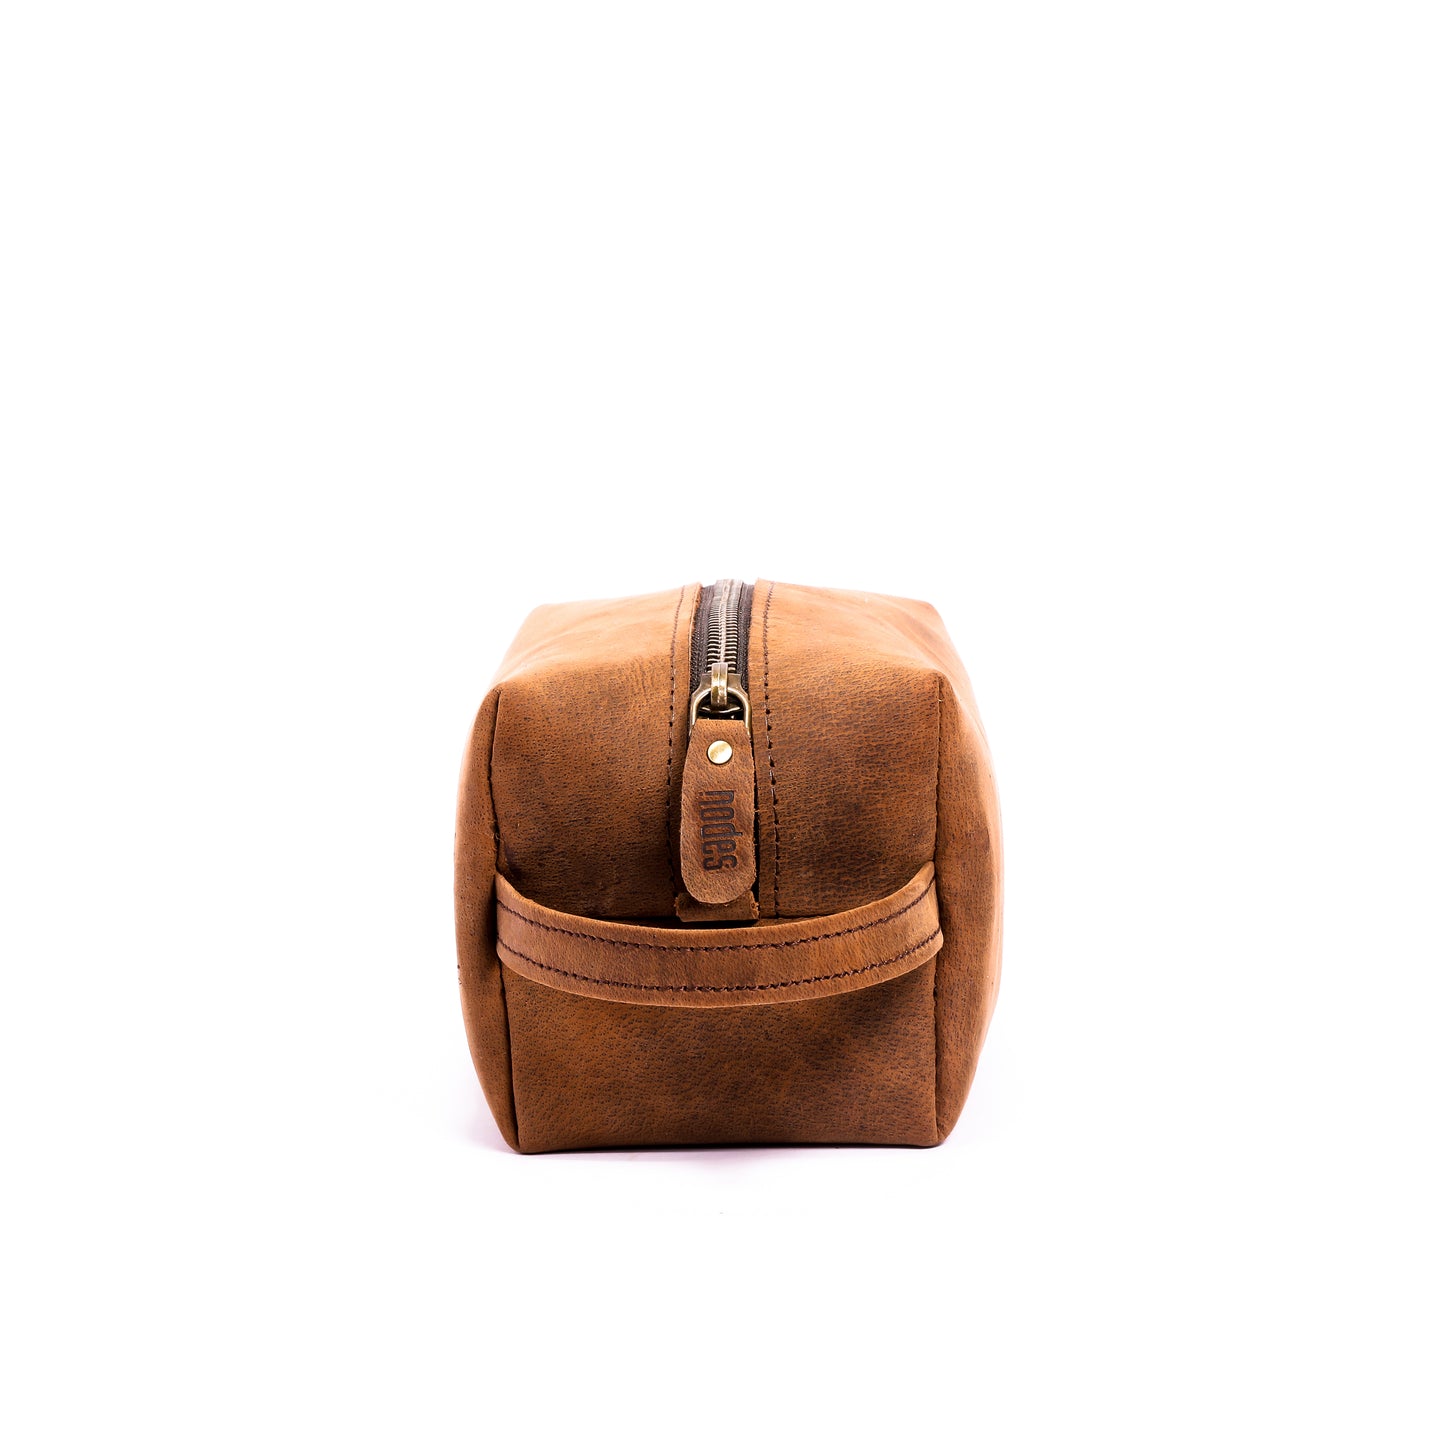 a brown leather toiletry pouch with one big compartment with zipper for travel needs , travel pouch, vanity pouch, leather bag, Genuine leather bag, toiletry pouch.